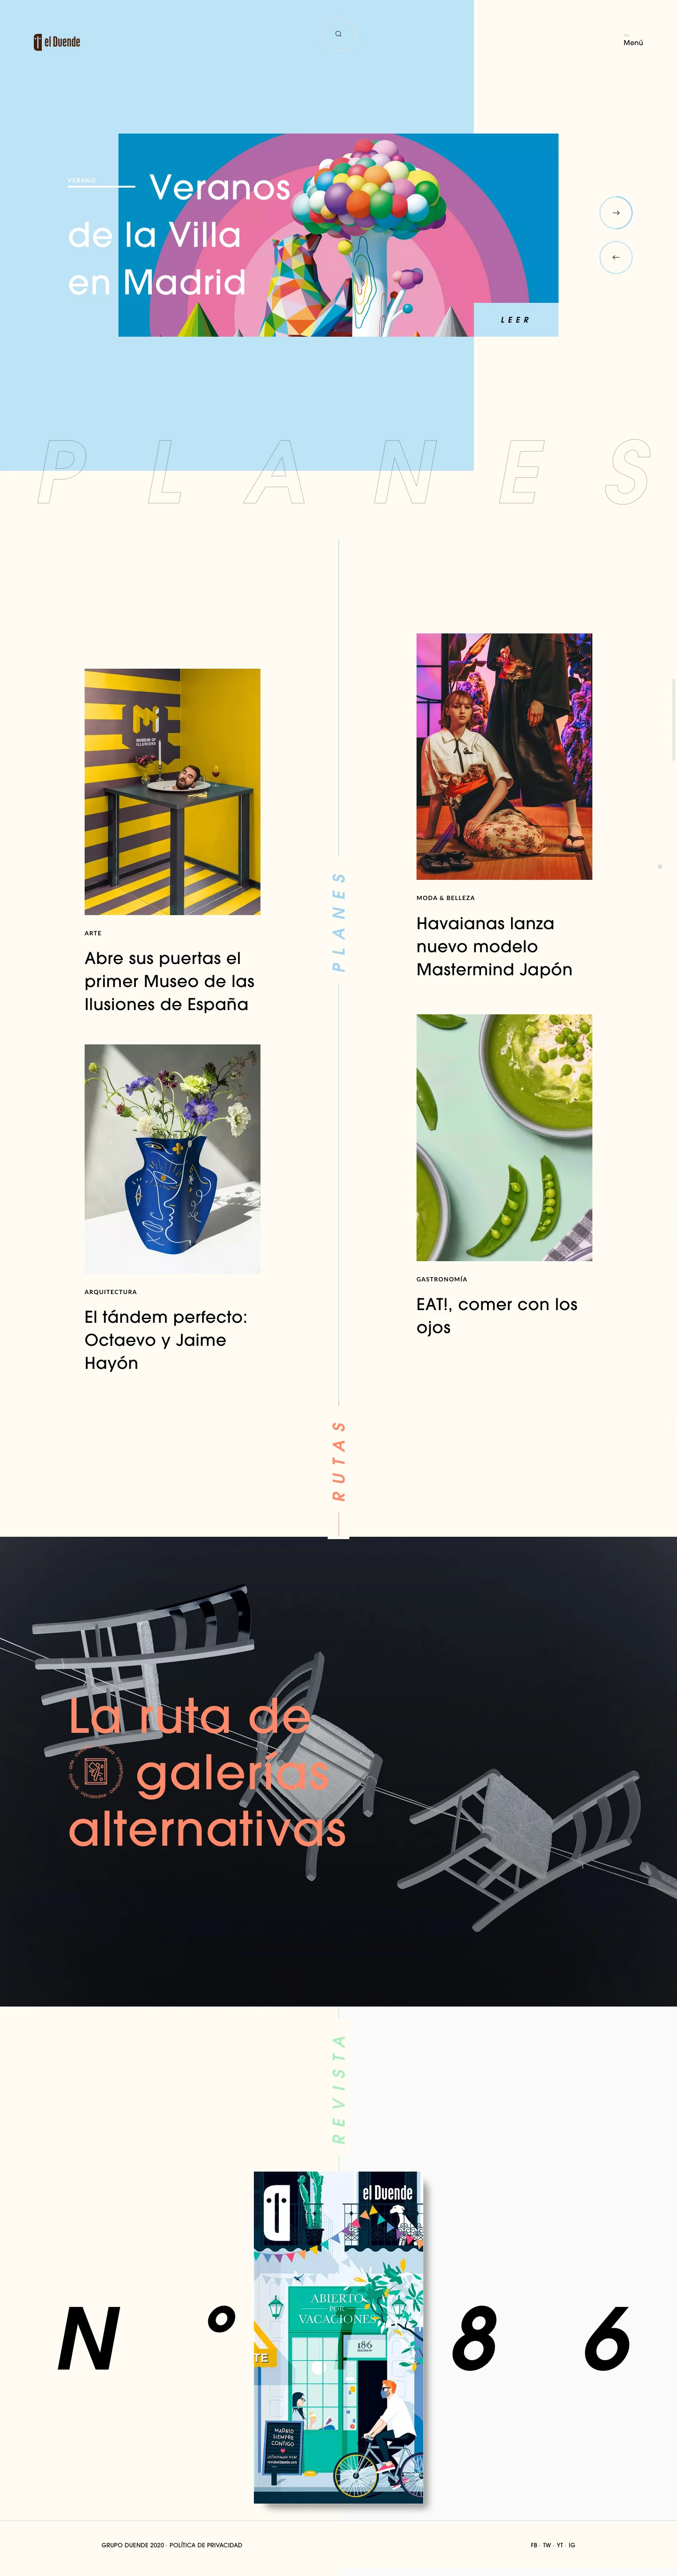 Revista El Duende Landing Page Example: Cultural magazine that has been distributed in Madrid since 1998. Each edition deals with a topic in a monographic way, always with a twist and different formats.